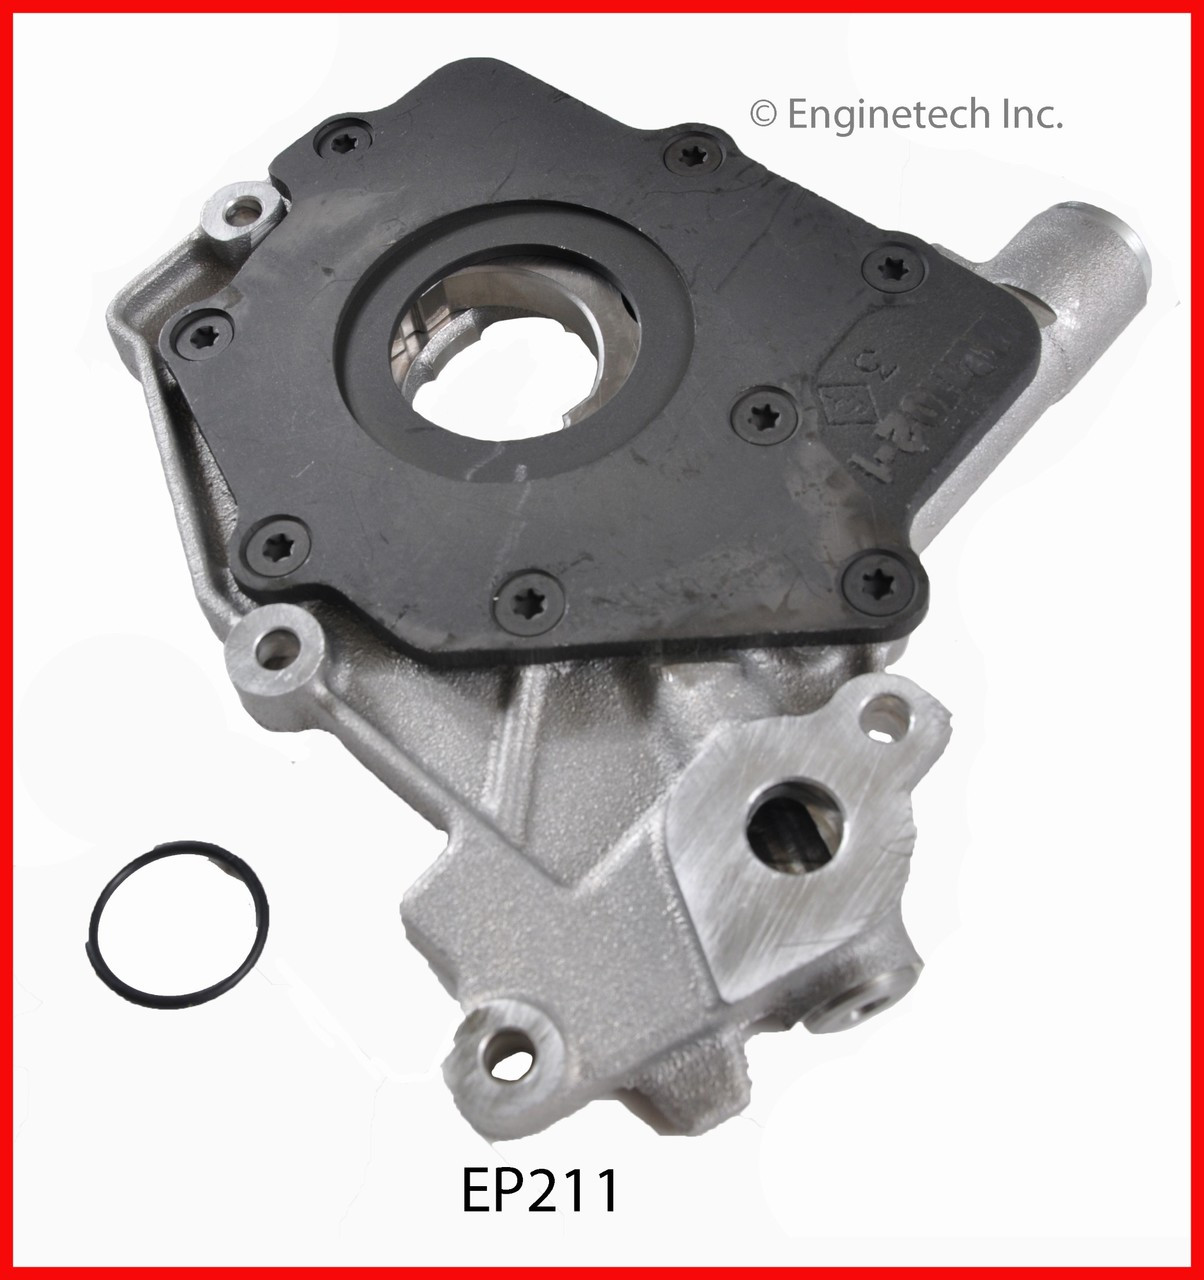 Oil Pump - 2007 Ford Five Hundred 3.0L (EP211.G69)